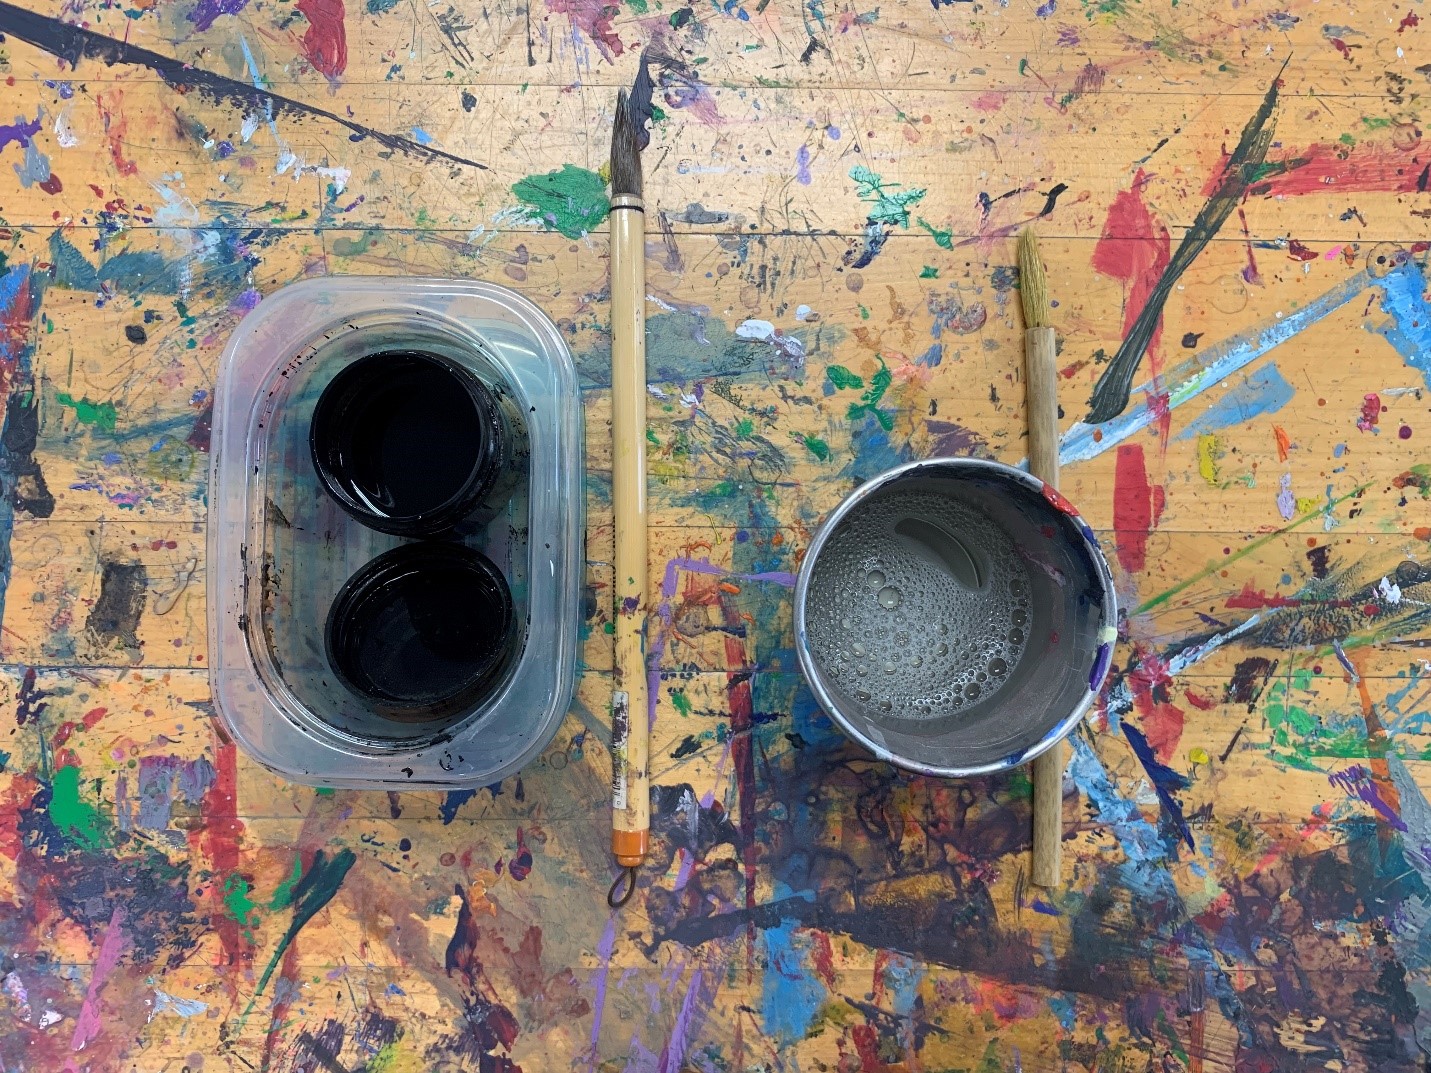 Two small pots of black ink, calligraphy brush, small cup of dispersant